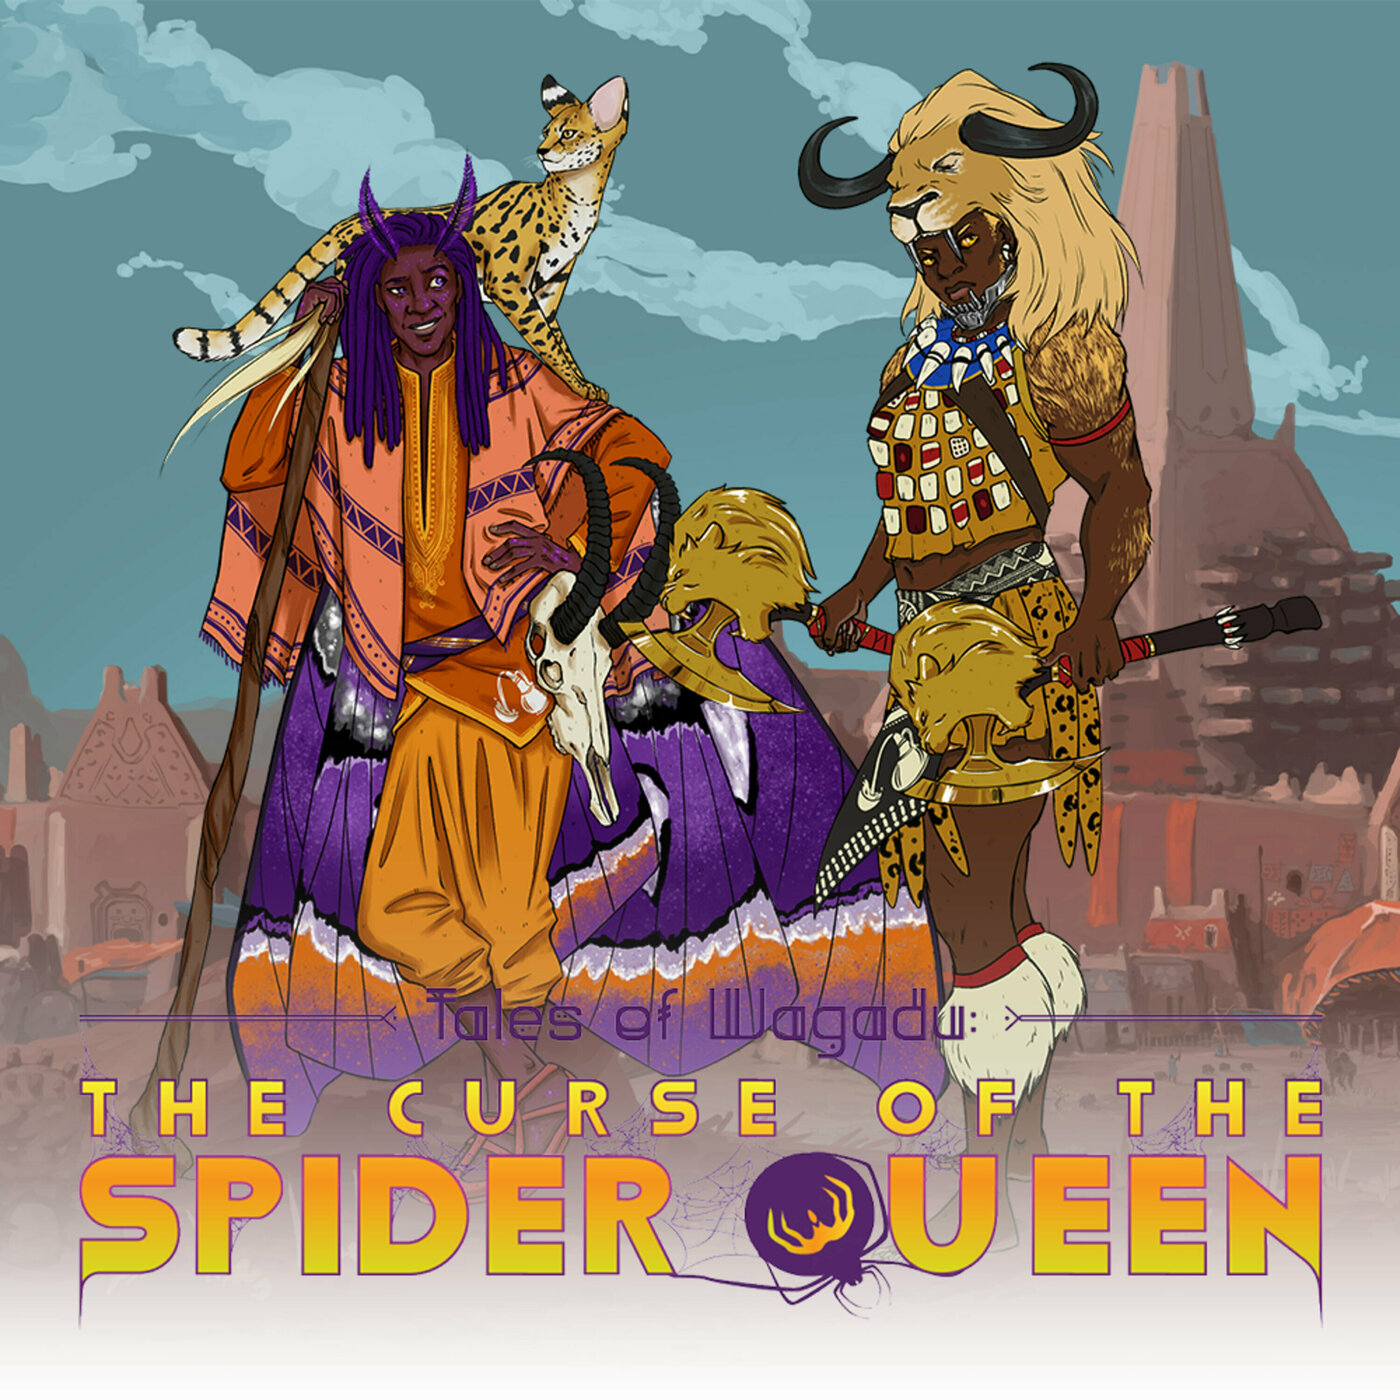 Tales of Wagadu: The Curse of the Spider Queen Ep. 12 